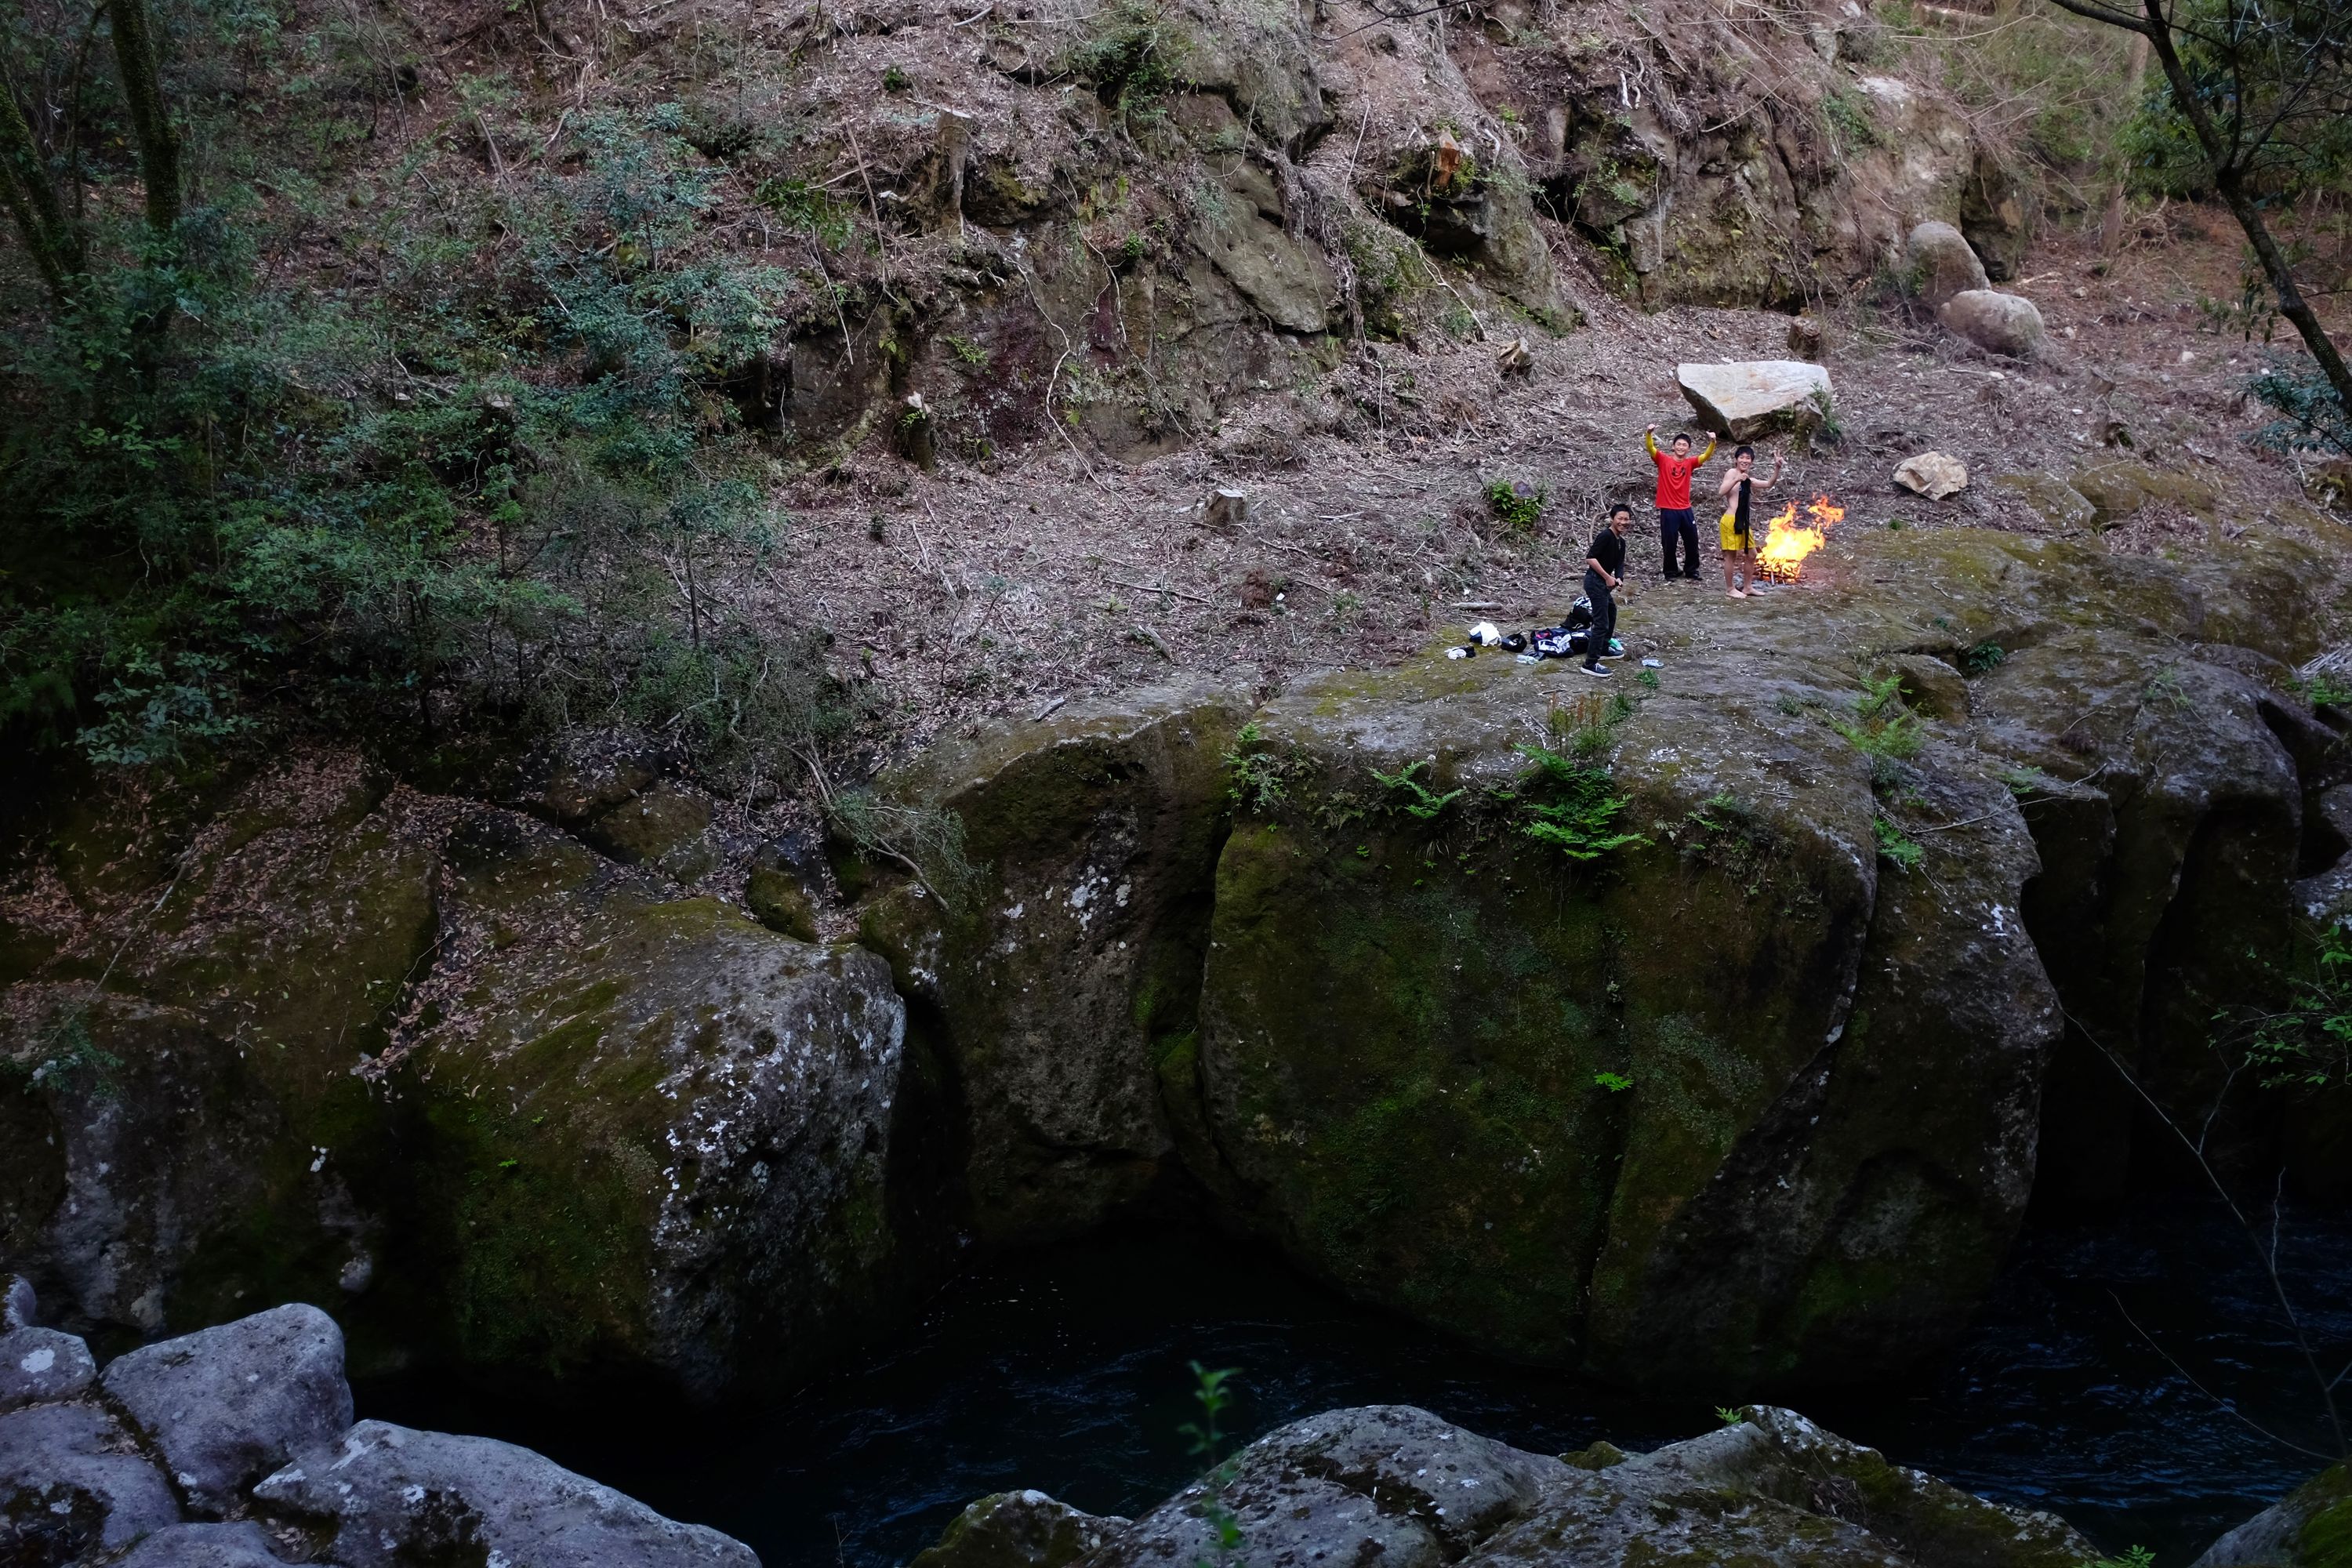 Kids waving by a campfire on the opposite bank of a stream with steep black rock walls.